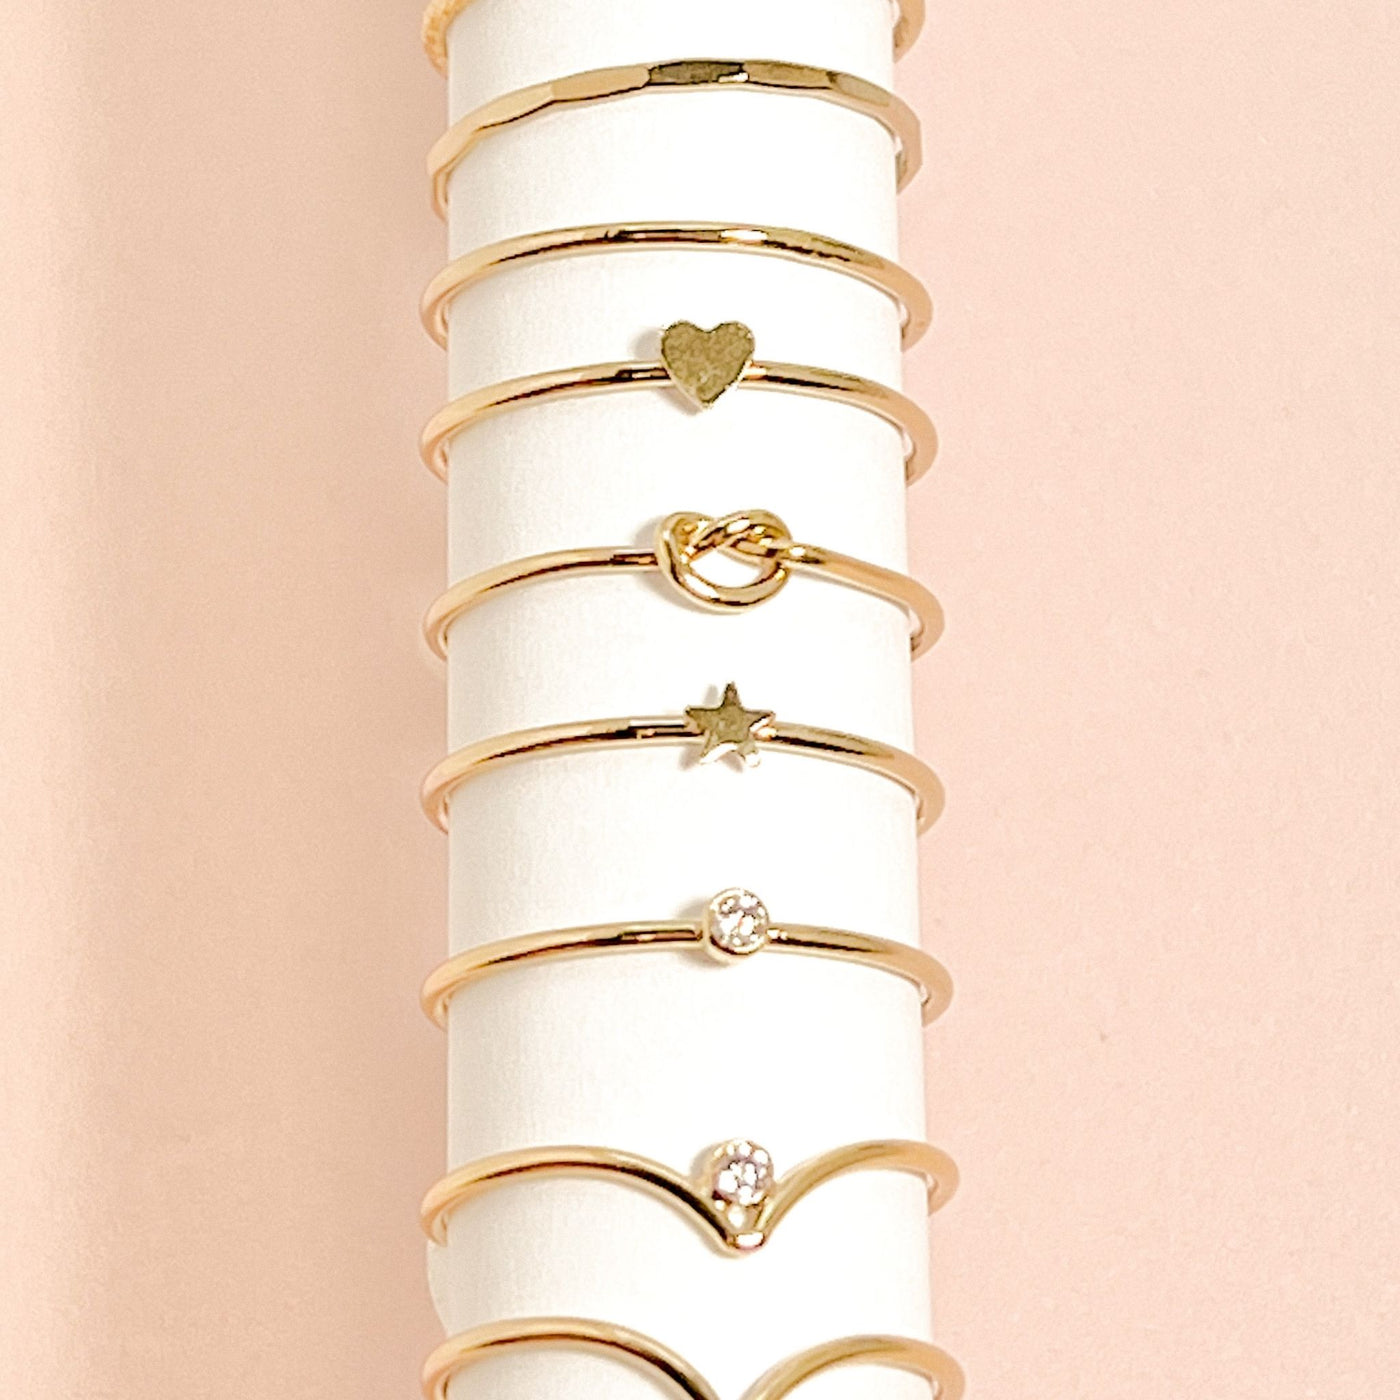   Assortment of 8 minimalist 14KGF stacking rings displayed on white paper tube with pink background 